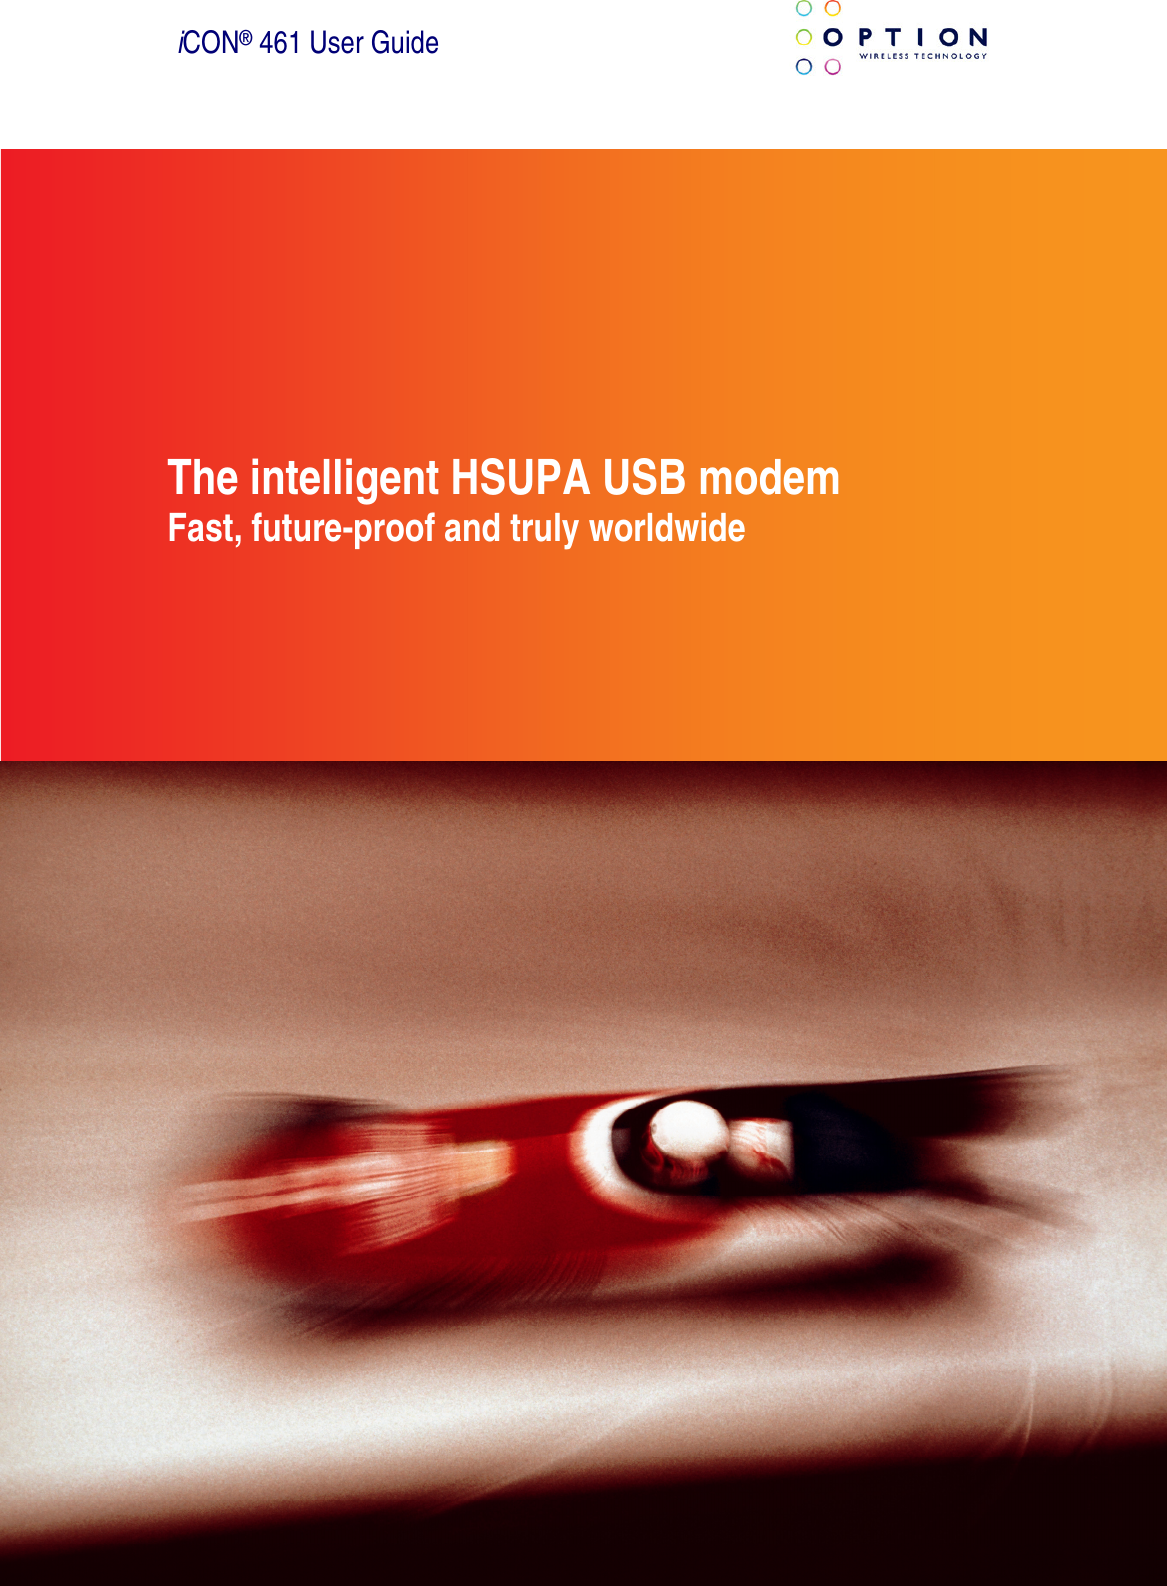  iCON® 461 User Guide The intelligent HSUPA USB modem Fast, future-proof and truly worldwide 